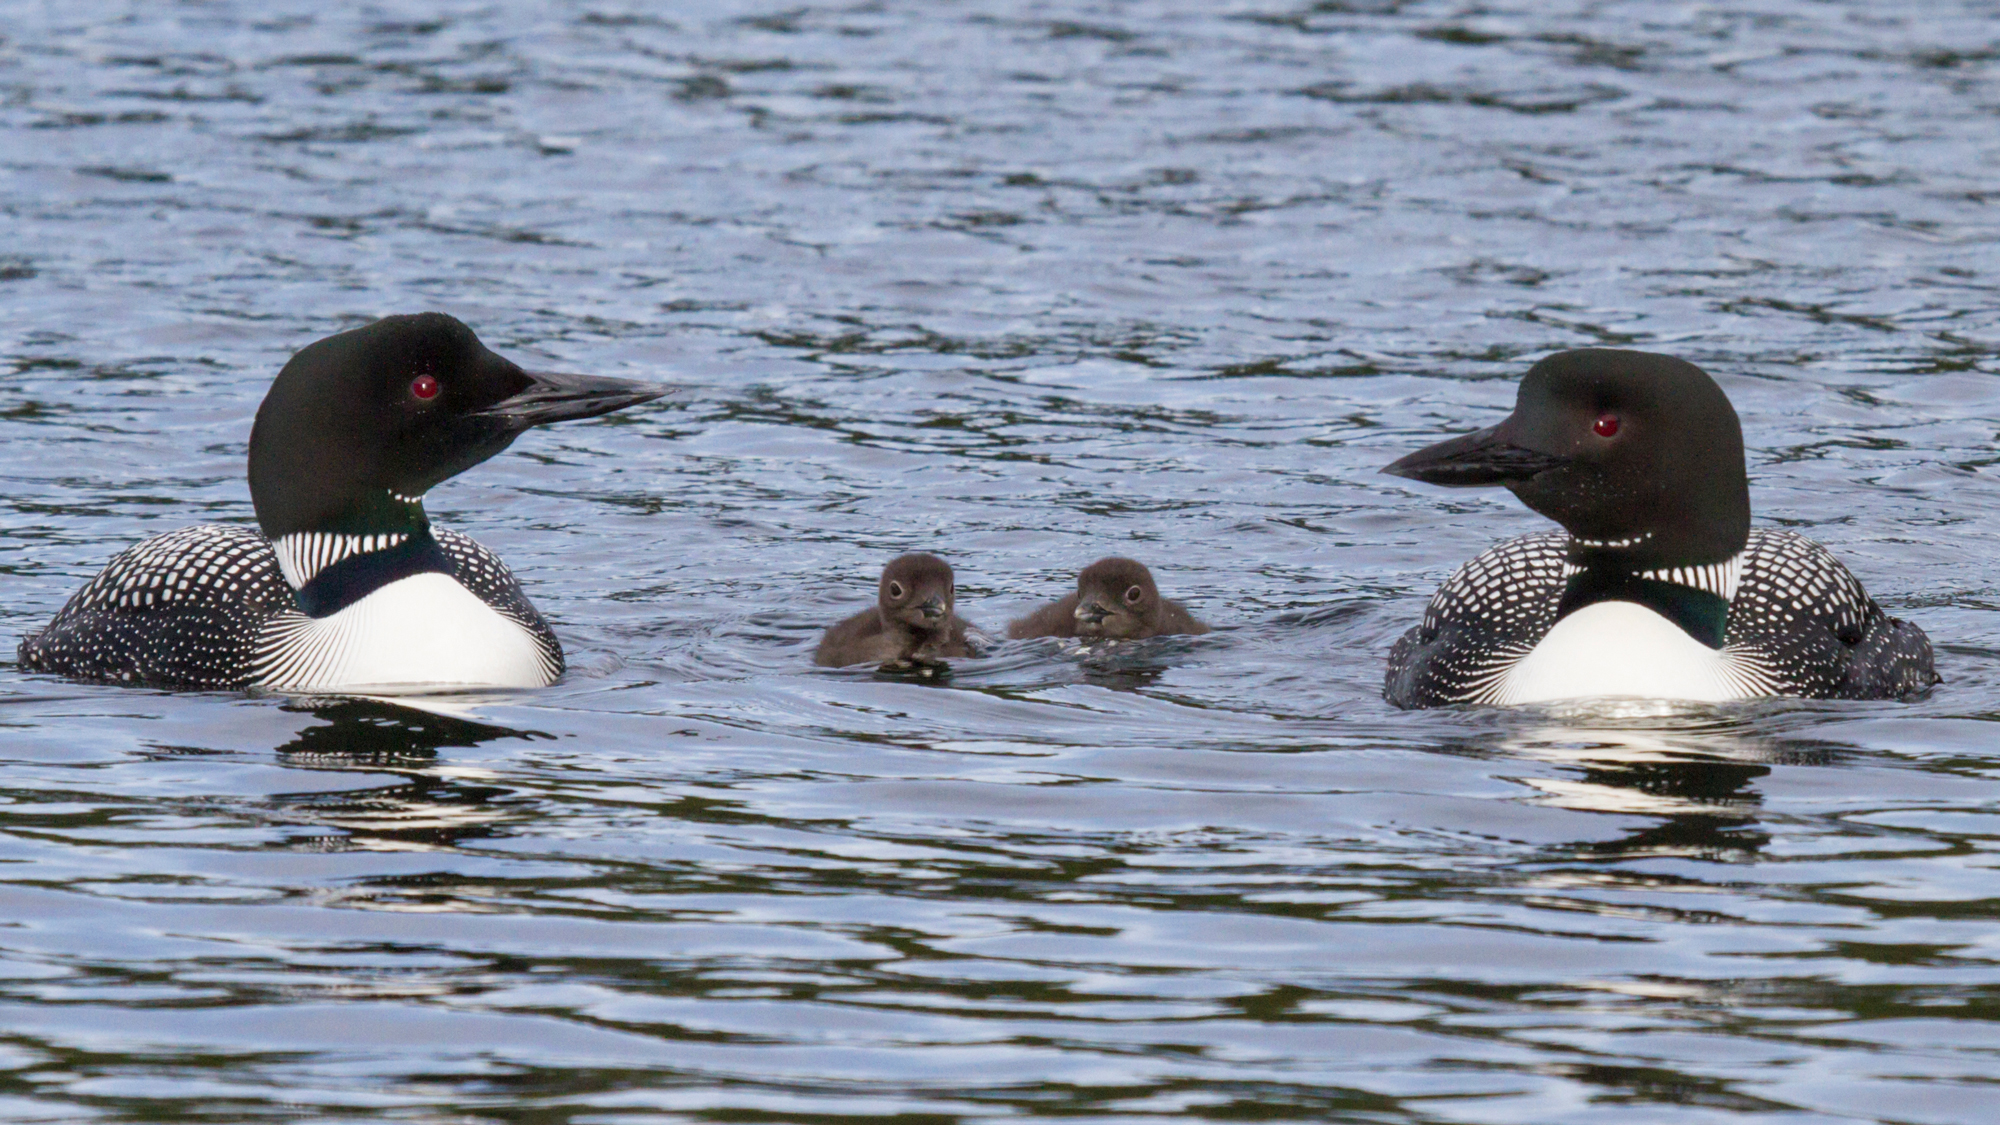 Both the male and female Common Loons of a territorial pair provide care of the young until fledging. That is one of the endearing qualities of the species. These chicks swim well even though they are only a few days old. Photo © Daniel and Ginger Poleschook